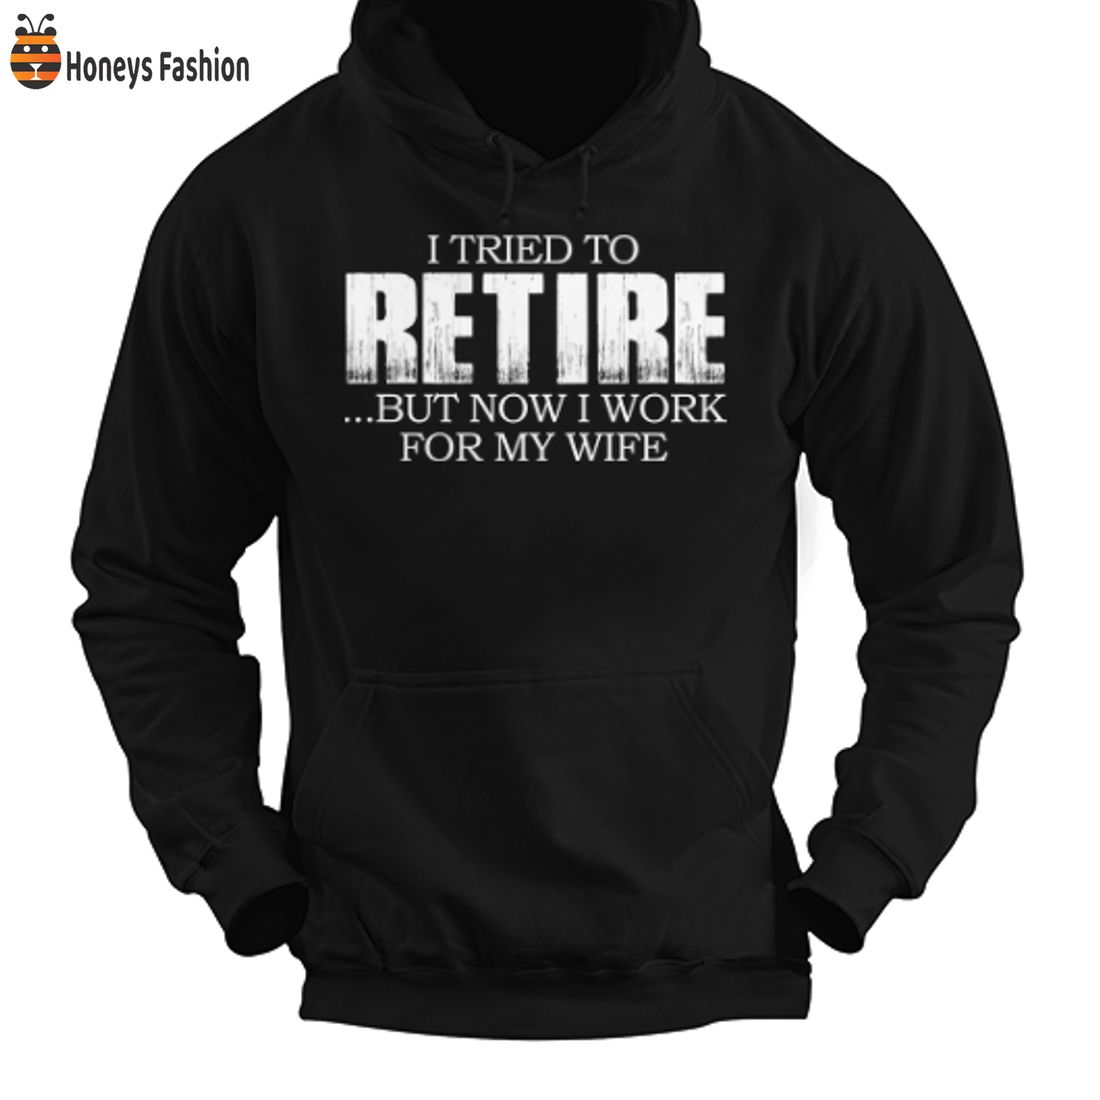 BEST SELLER I Tried To Retire But Now I Work For My Wife 2D Hoodie T Shirt